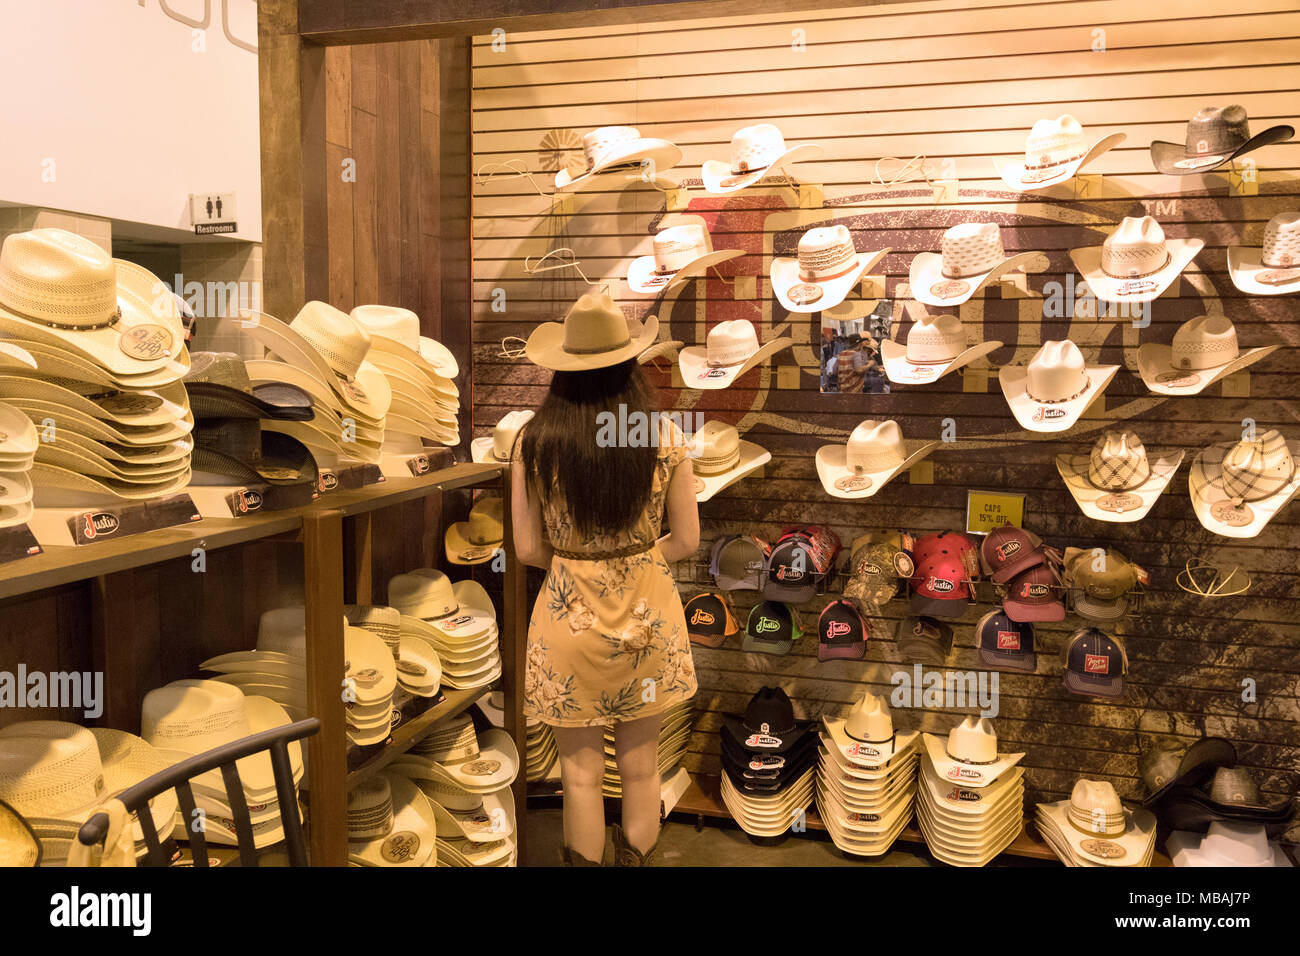 Woman in a cowboy hat store, Houston Livestock Show and Rodeo, Houston, Texas USA Stock Photo